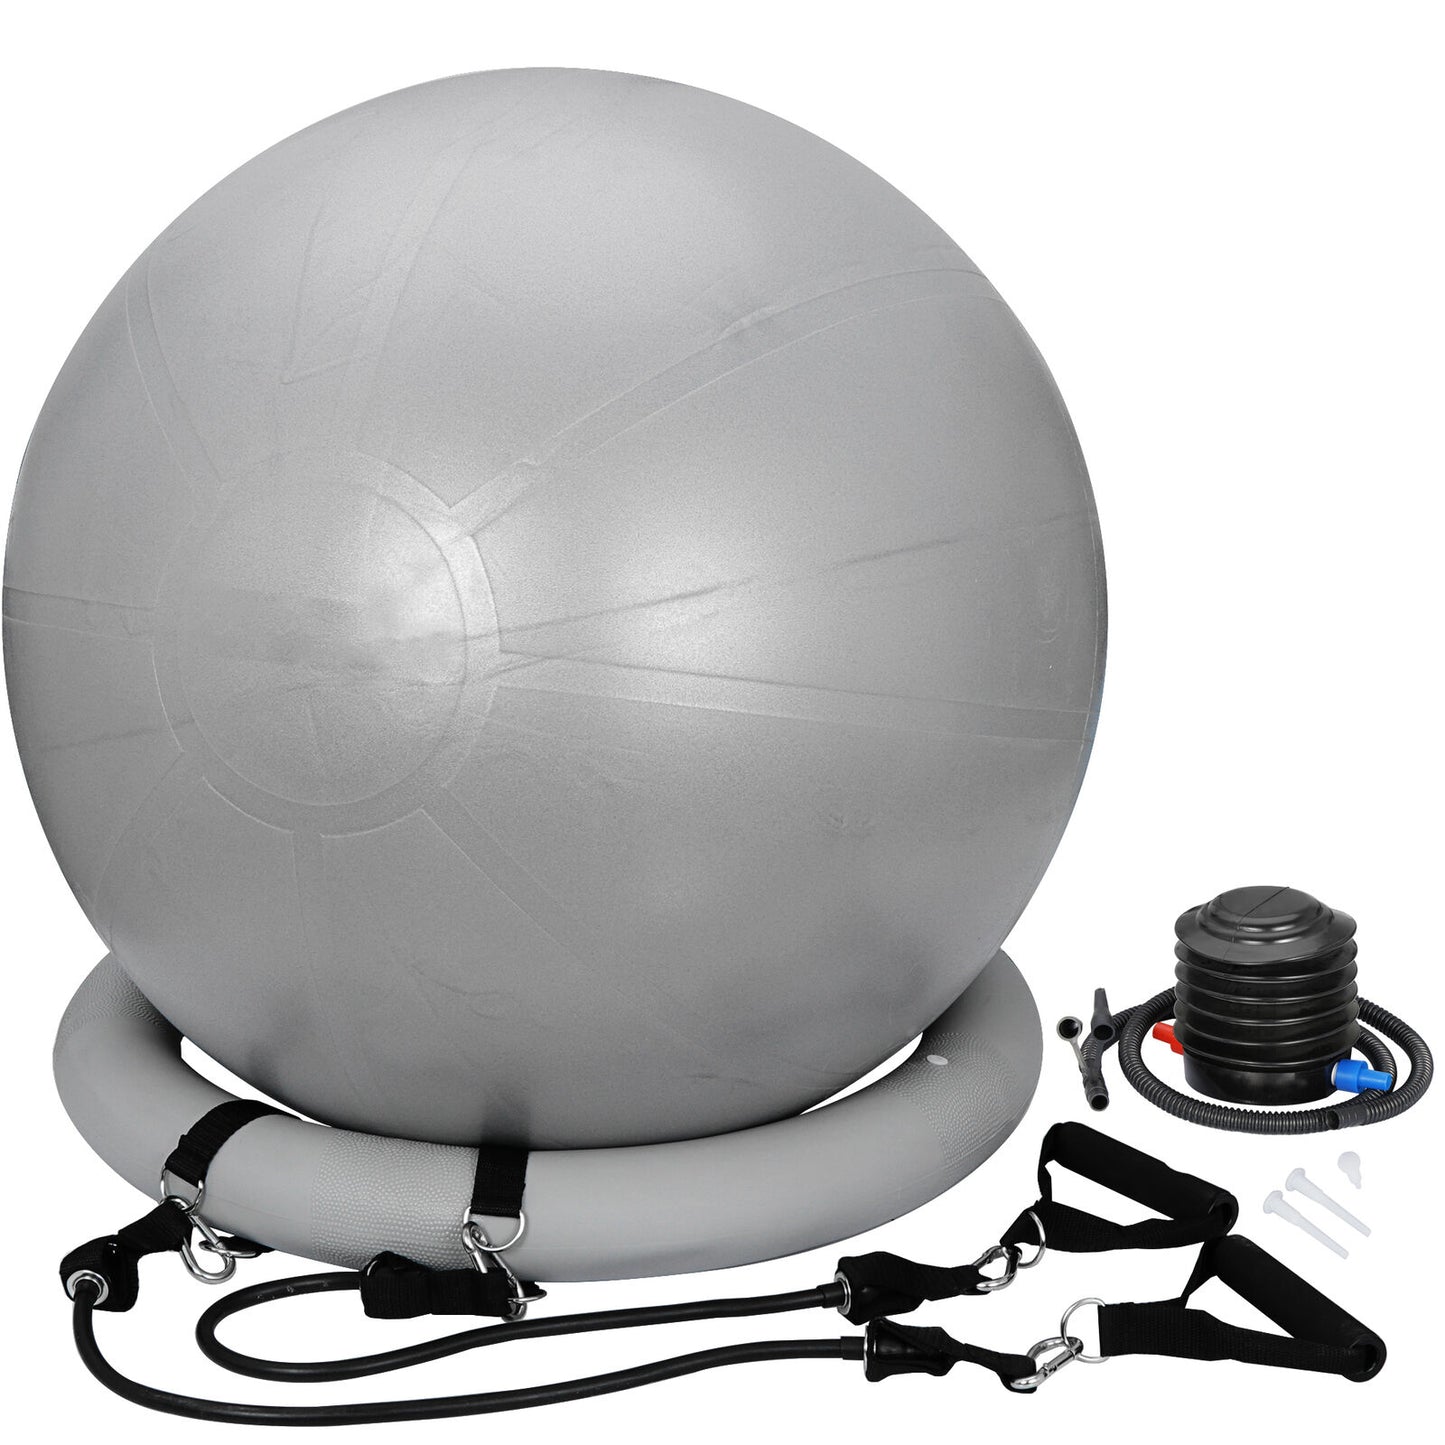 25.6"Exercise Fitness Yoga Pilate Ball Stability Base W/Workout Guide,Quick Pump